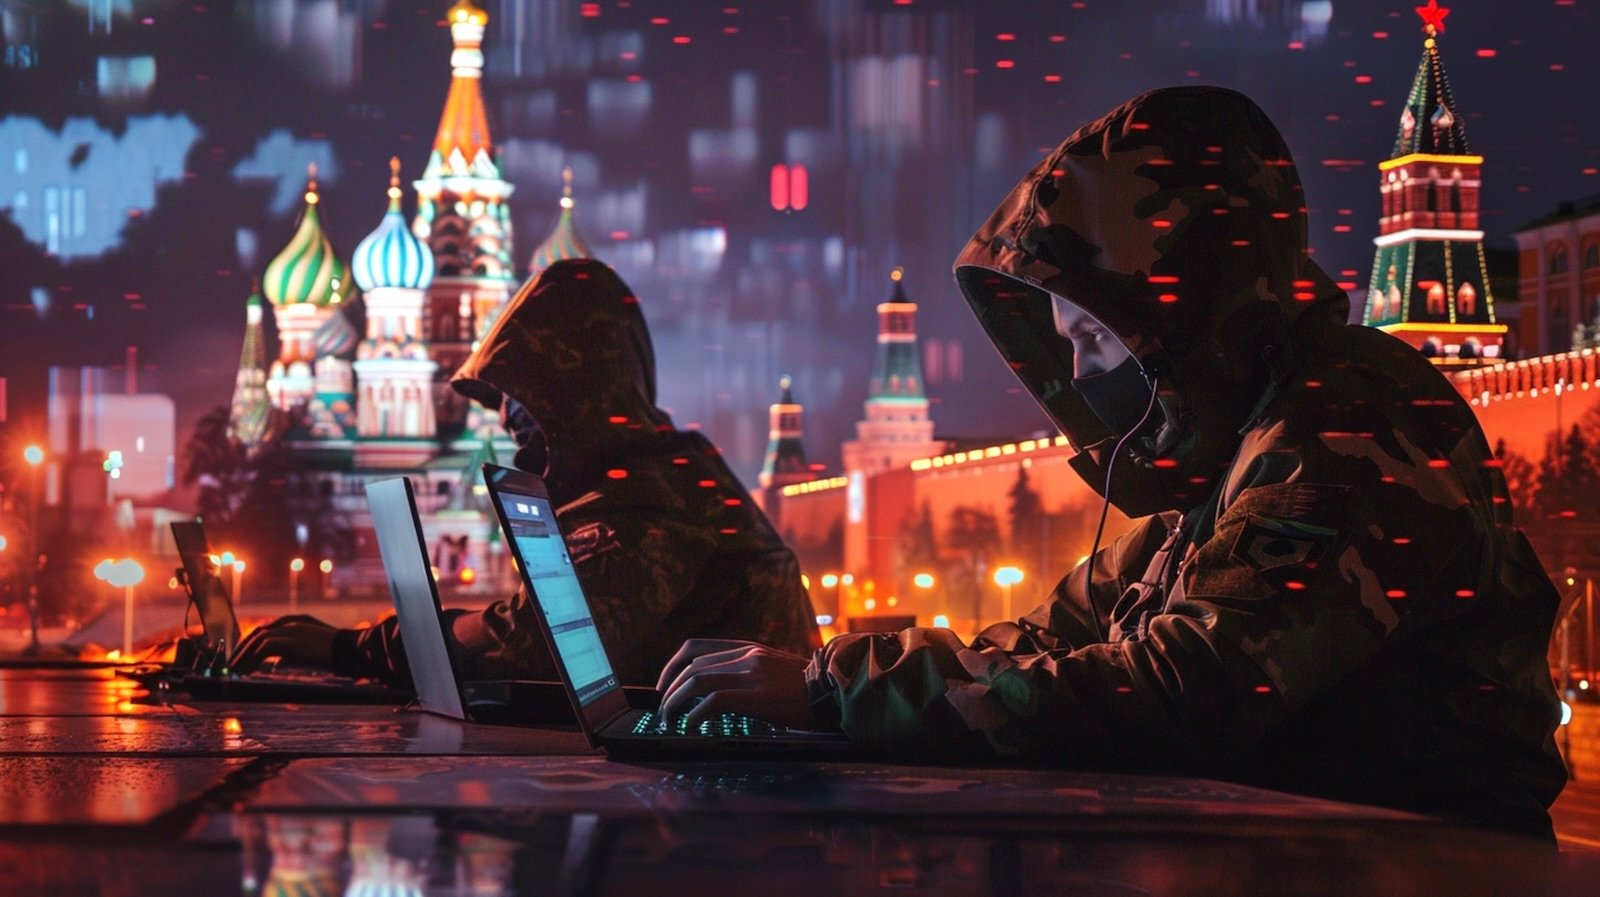 Poland says Russian military hackers target its govt networks